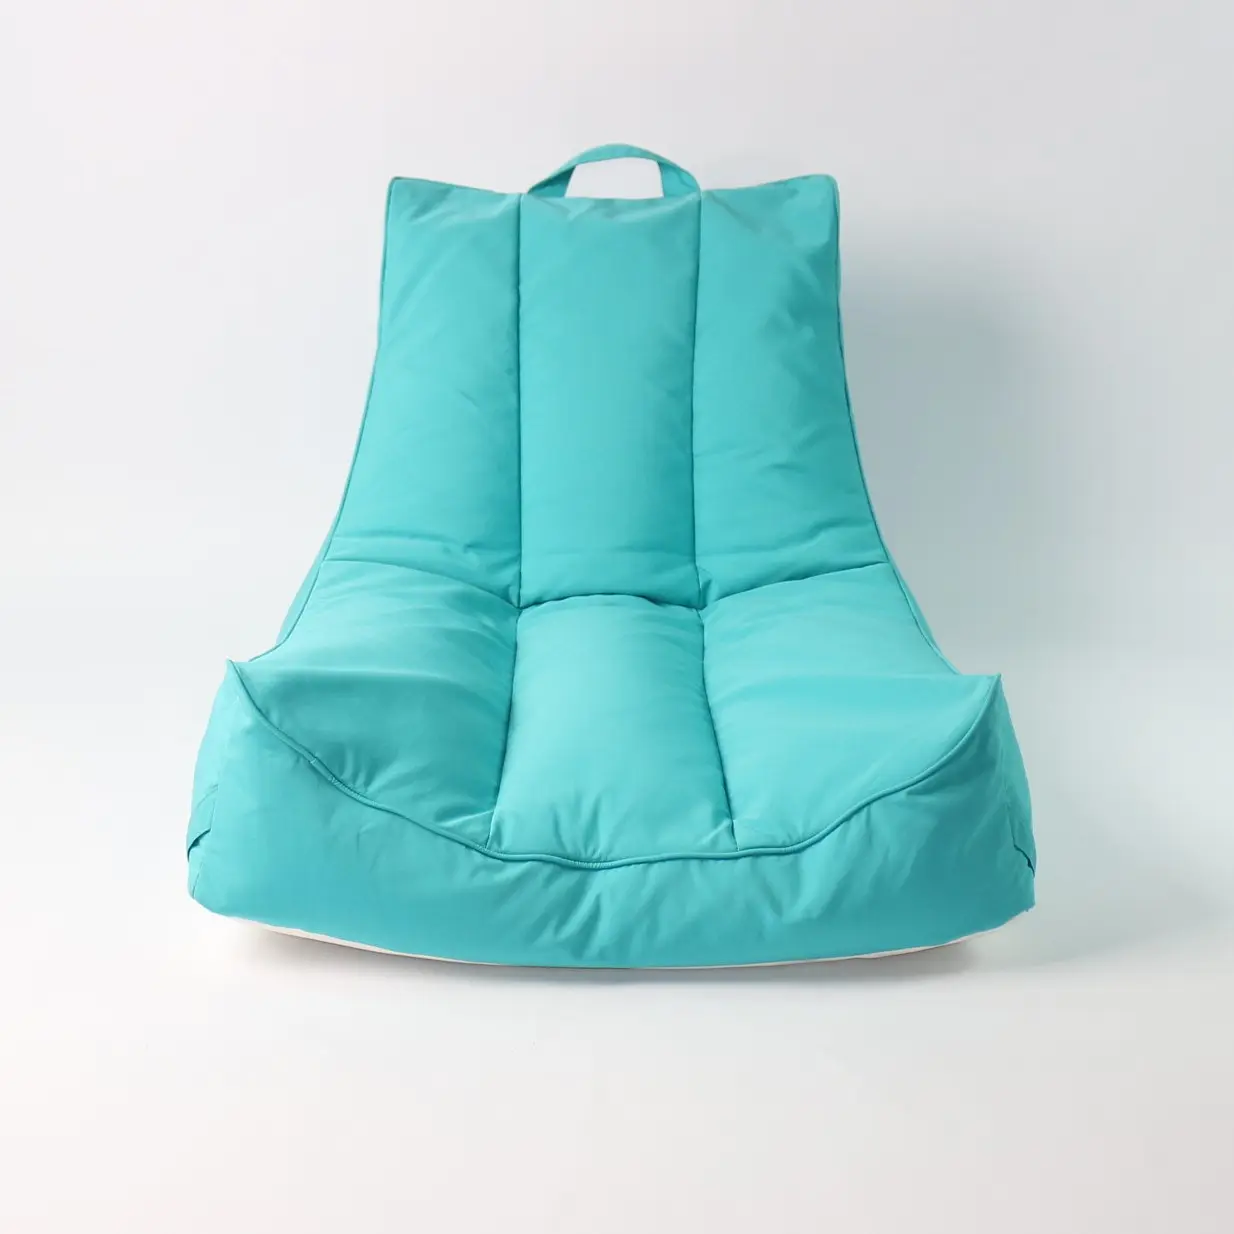 100% Olefin Luxury Outdoor Fabric Bean Bag Chair Float On Swimming Pool For Bean Bag Seating